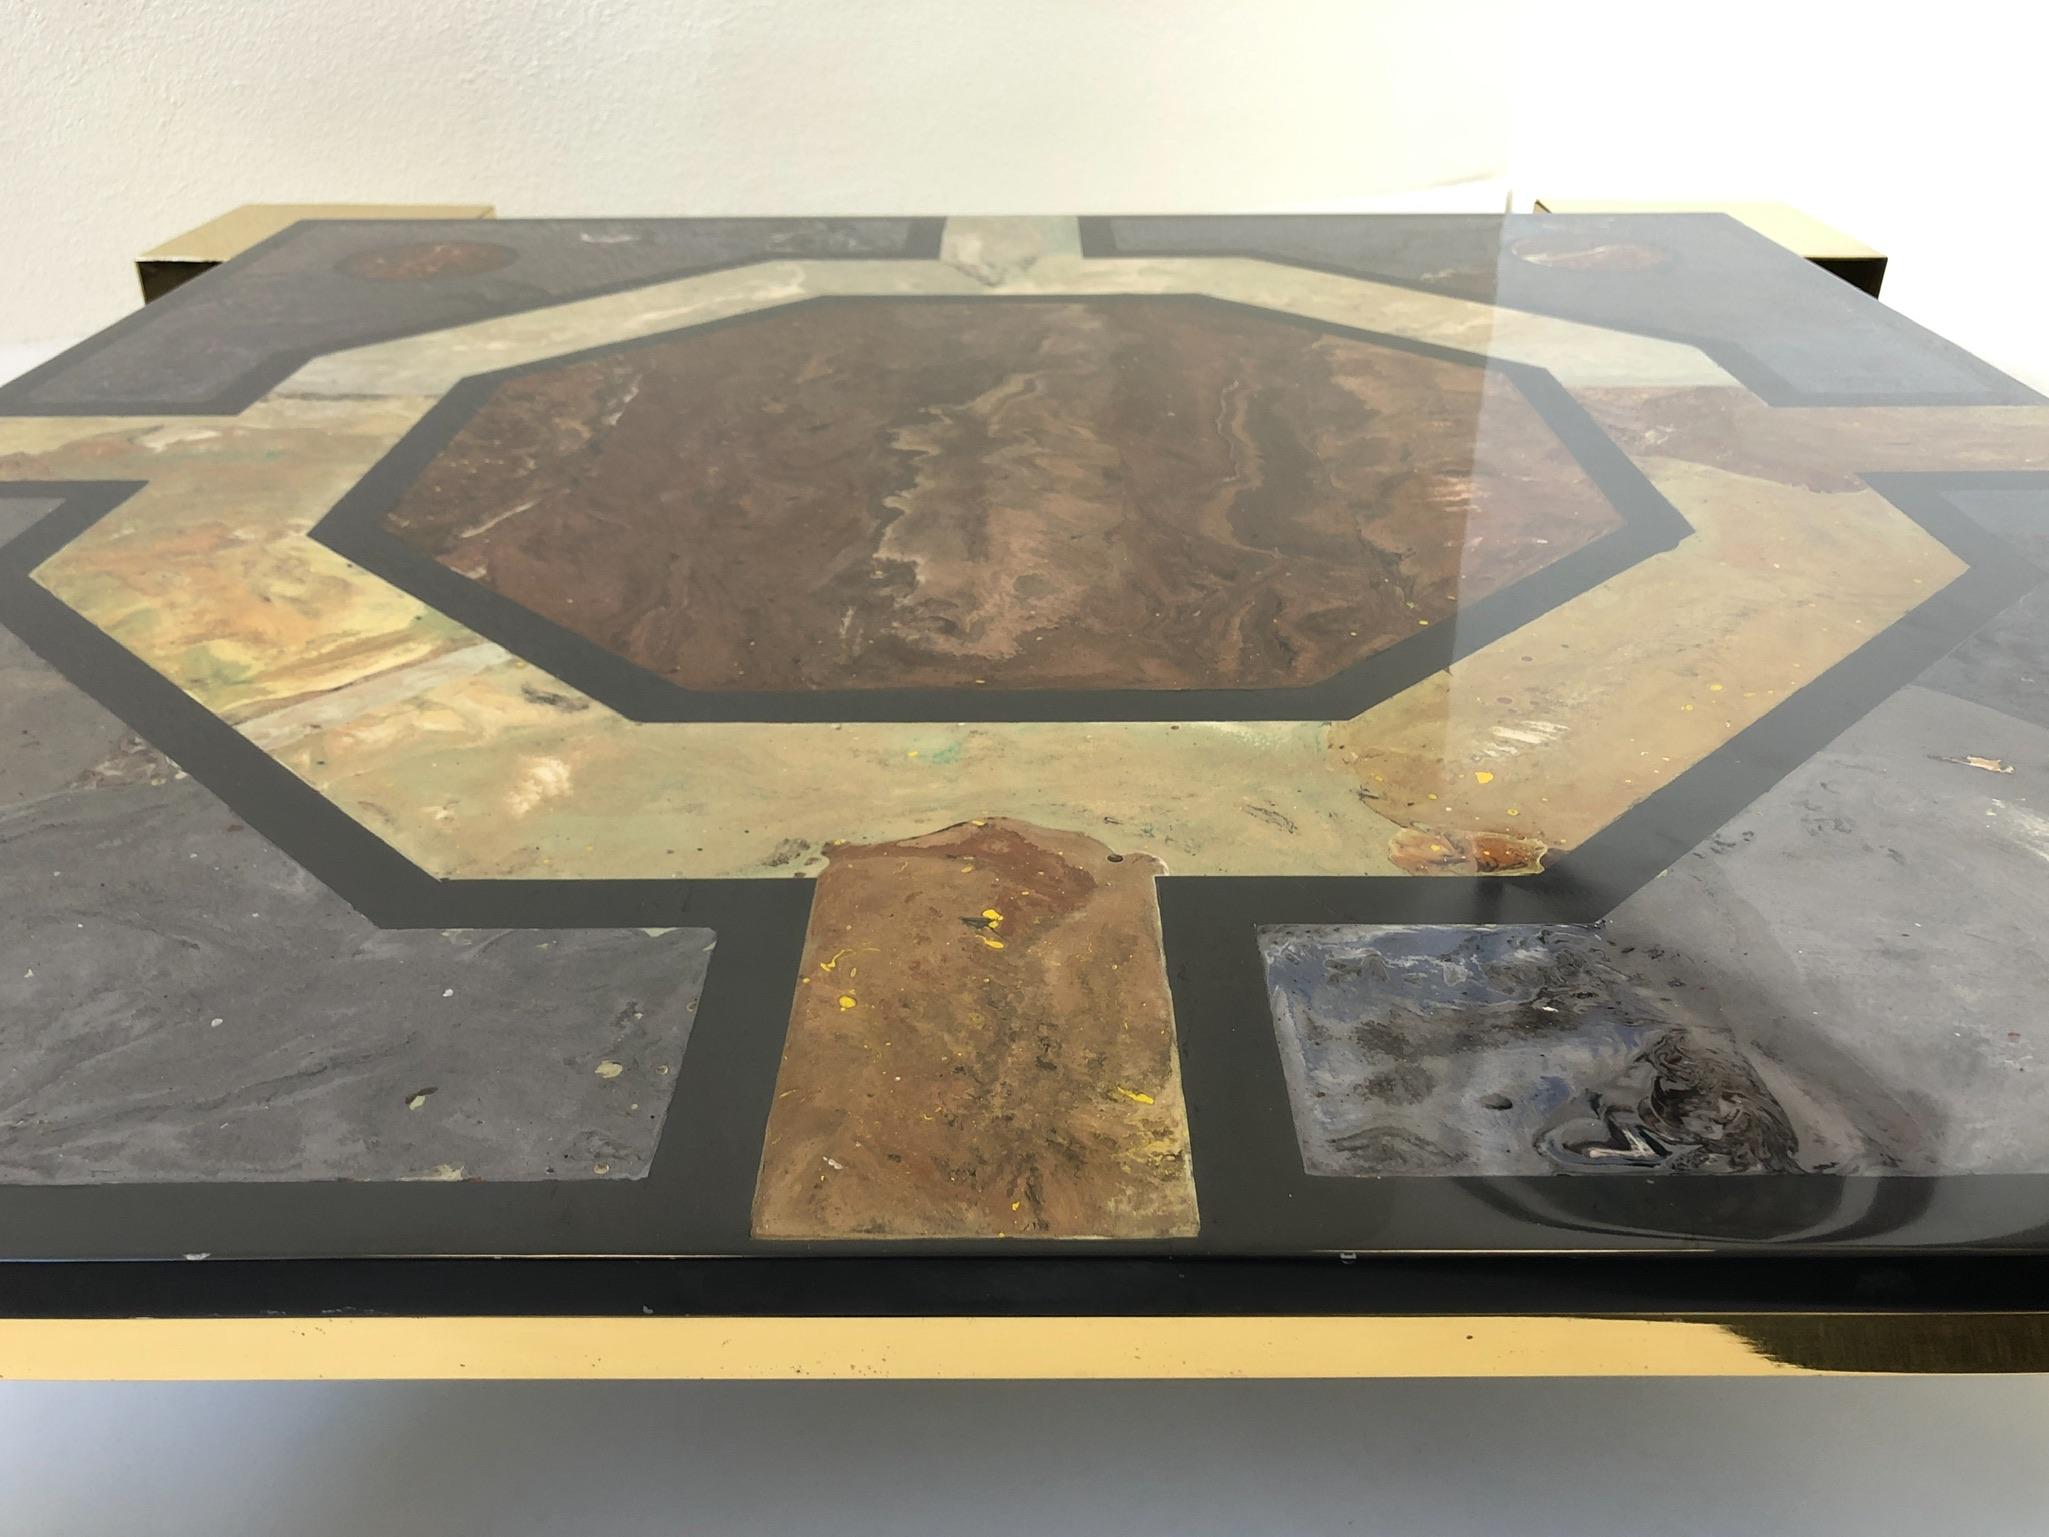 A spectacular Italian polish brass and marbleized inlaid design on a 43.5” wide 43.5” deep black slate top. The table was designed by Italian designer Marcello Mioni in the 1980s. The table has be professionally polished. Overall dimensions: 49”